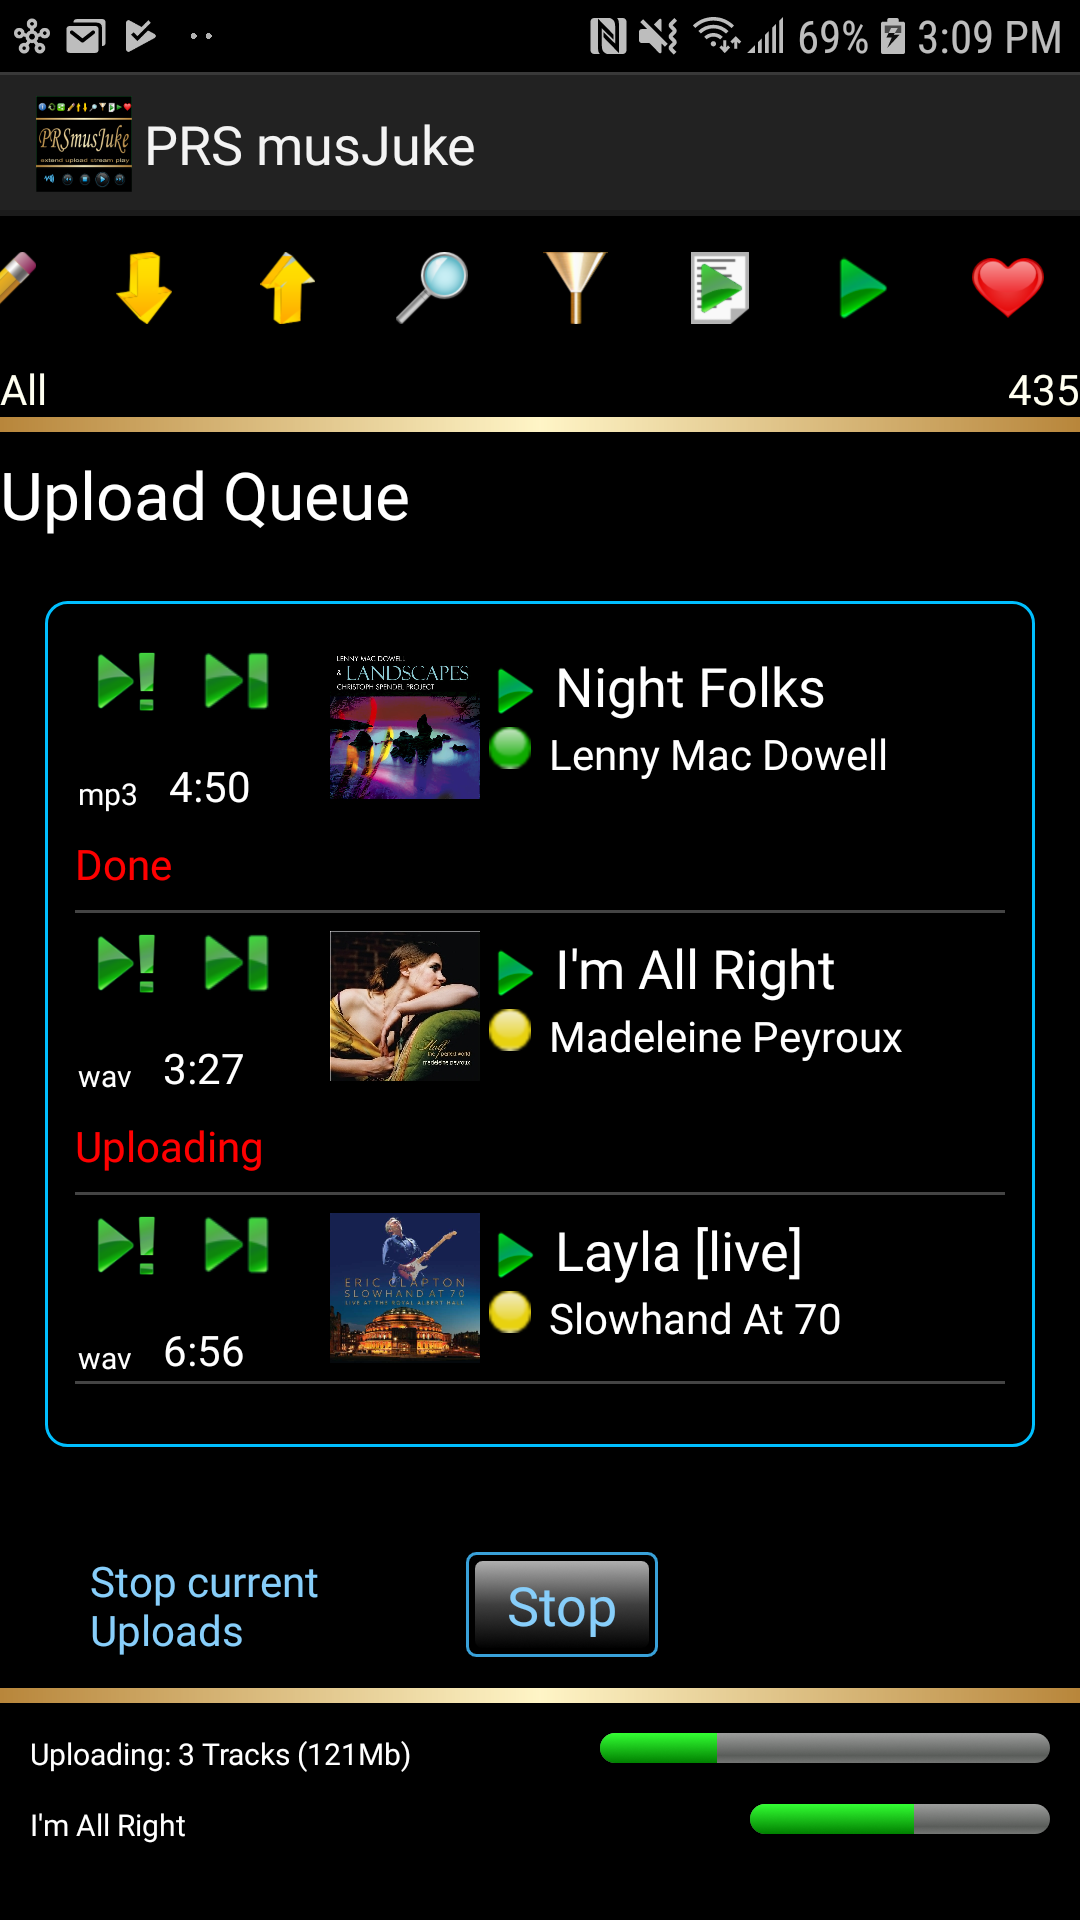 Drop albums, tracks, playlists to uploadto your phone